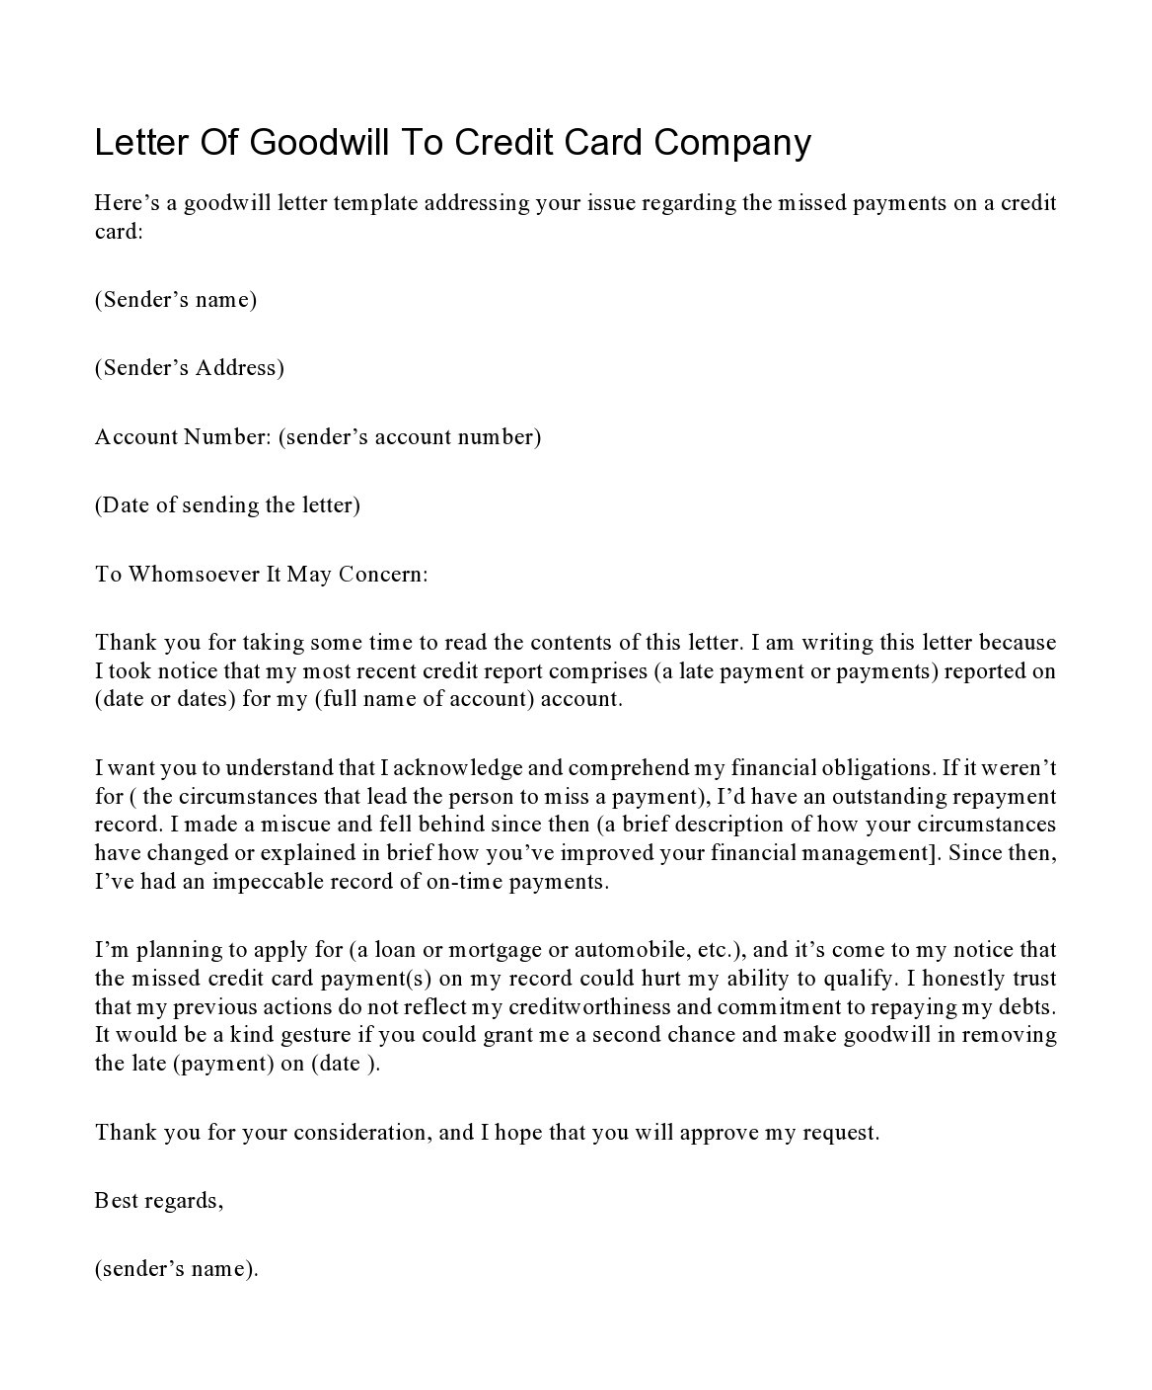 goodwill letter to credit card company